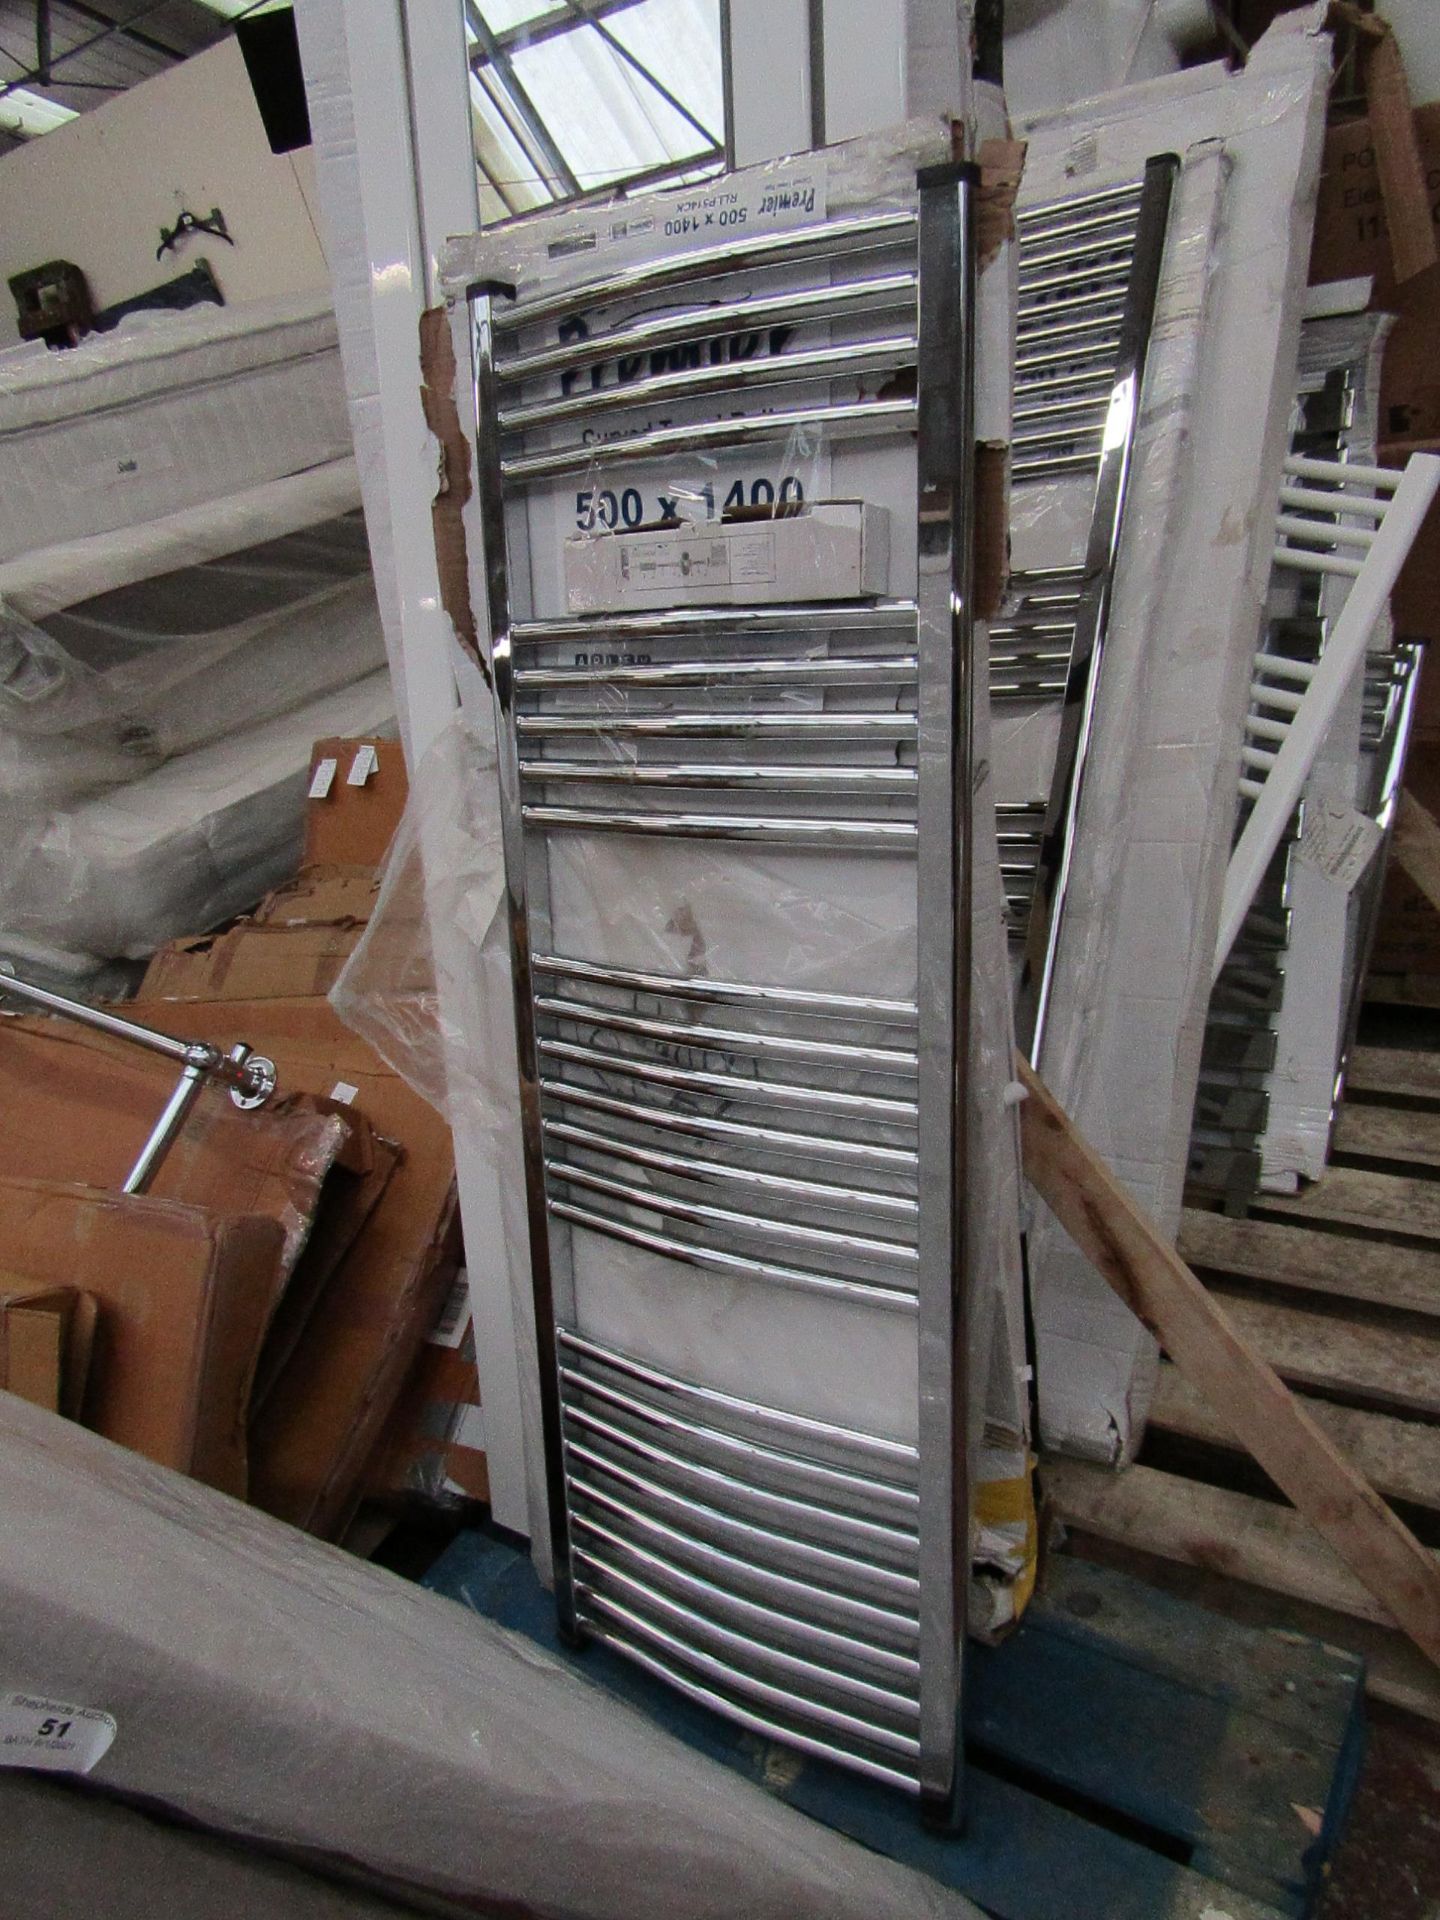 Loco curved towel radiator 500 x 1400, ex-display and boxed. Please note, this lot may contain marks